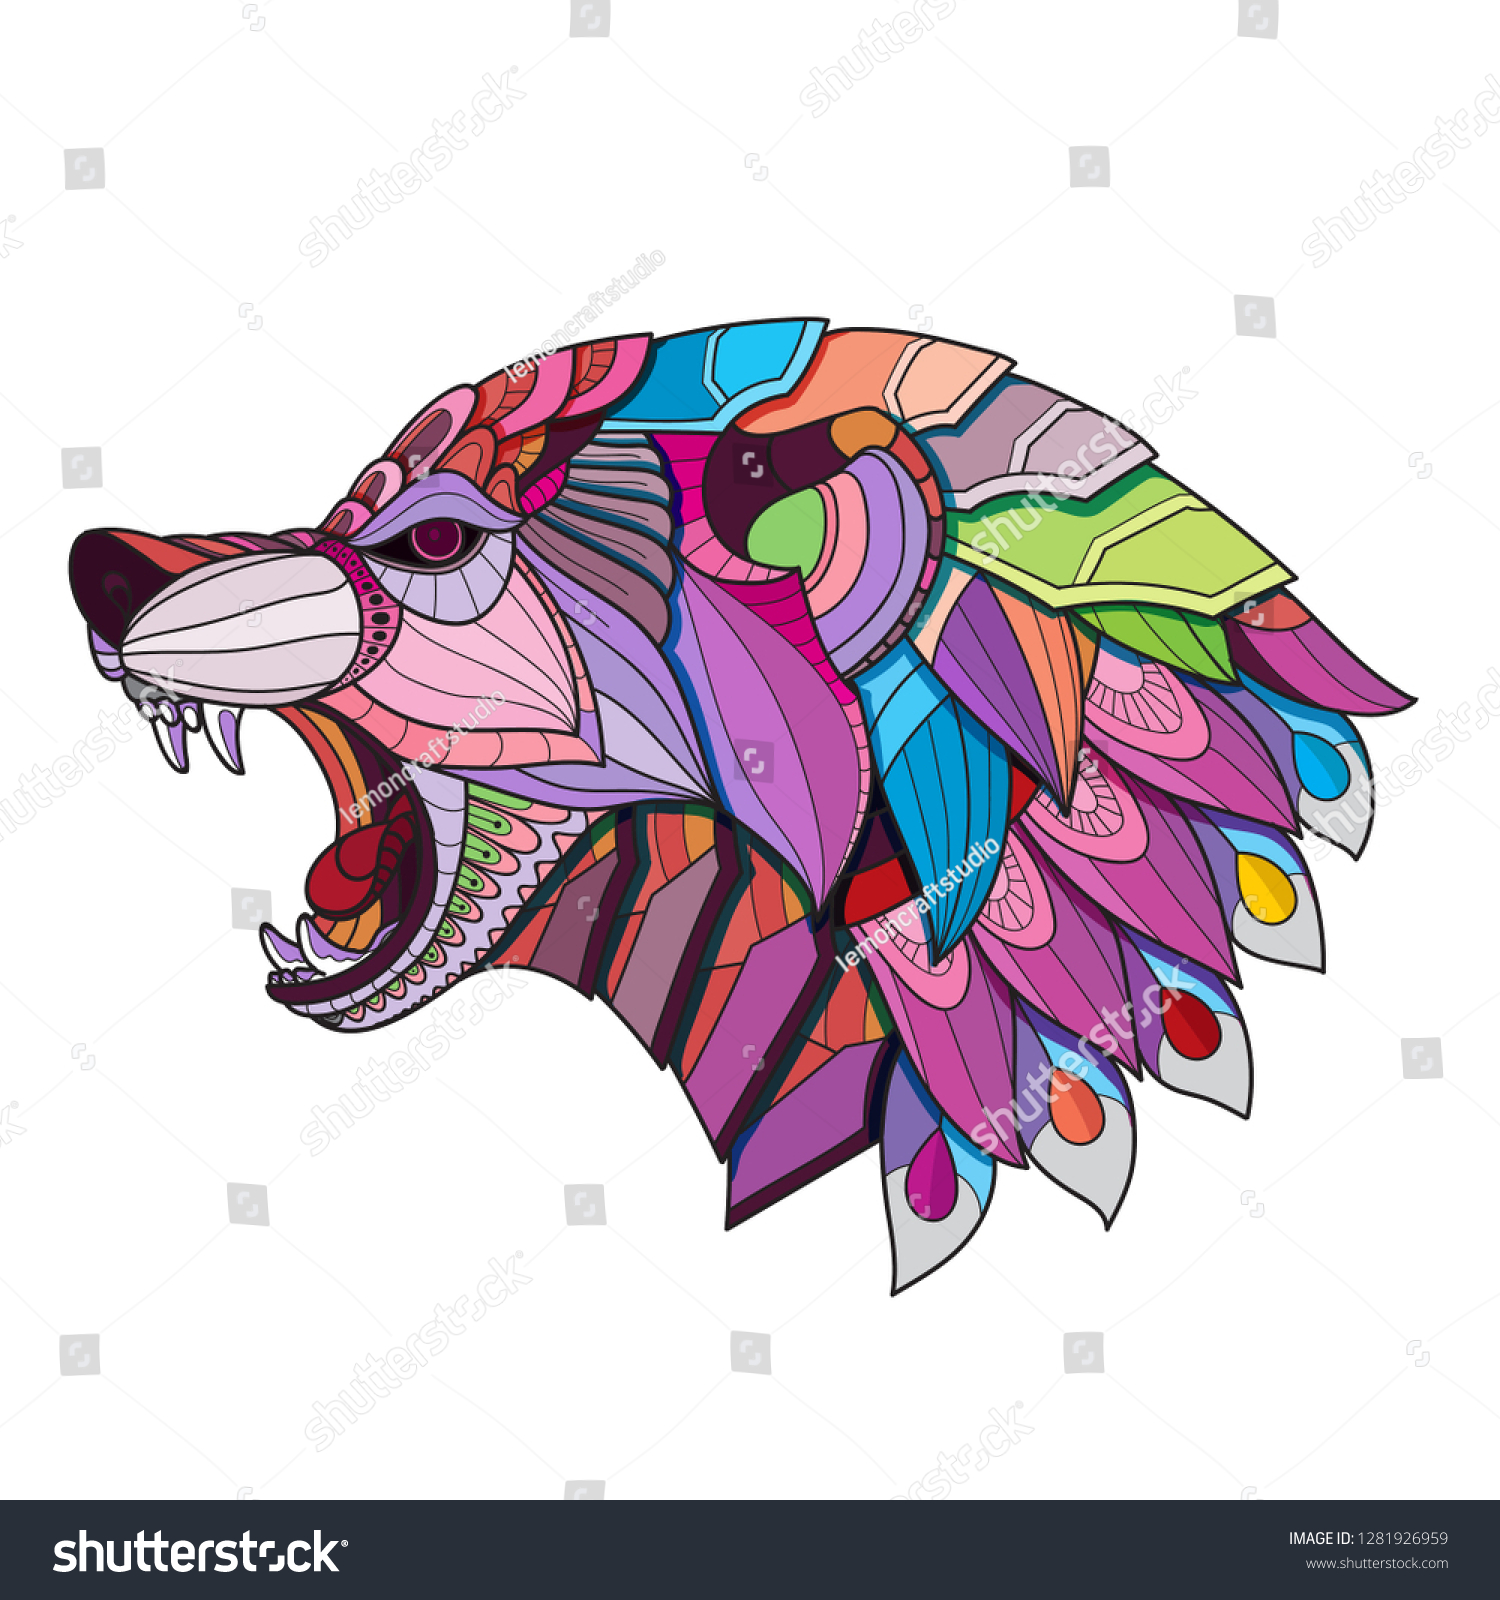 SVG of zentangle wolf. zentangle animal. zentangle colored. Hand drawn doodle zentangle wolf head illustration. Decorative ornate vector wolf head drawing colored.  -Vector svg